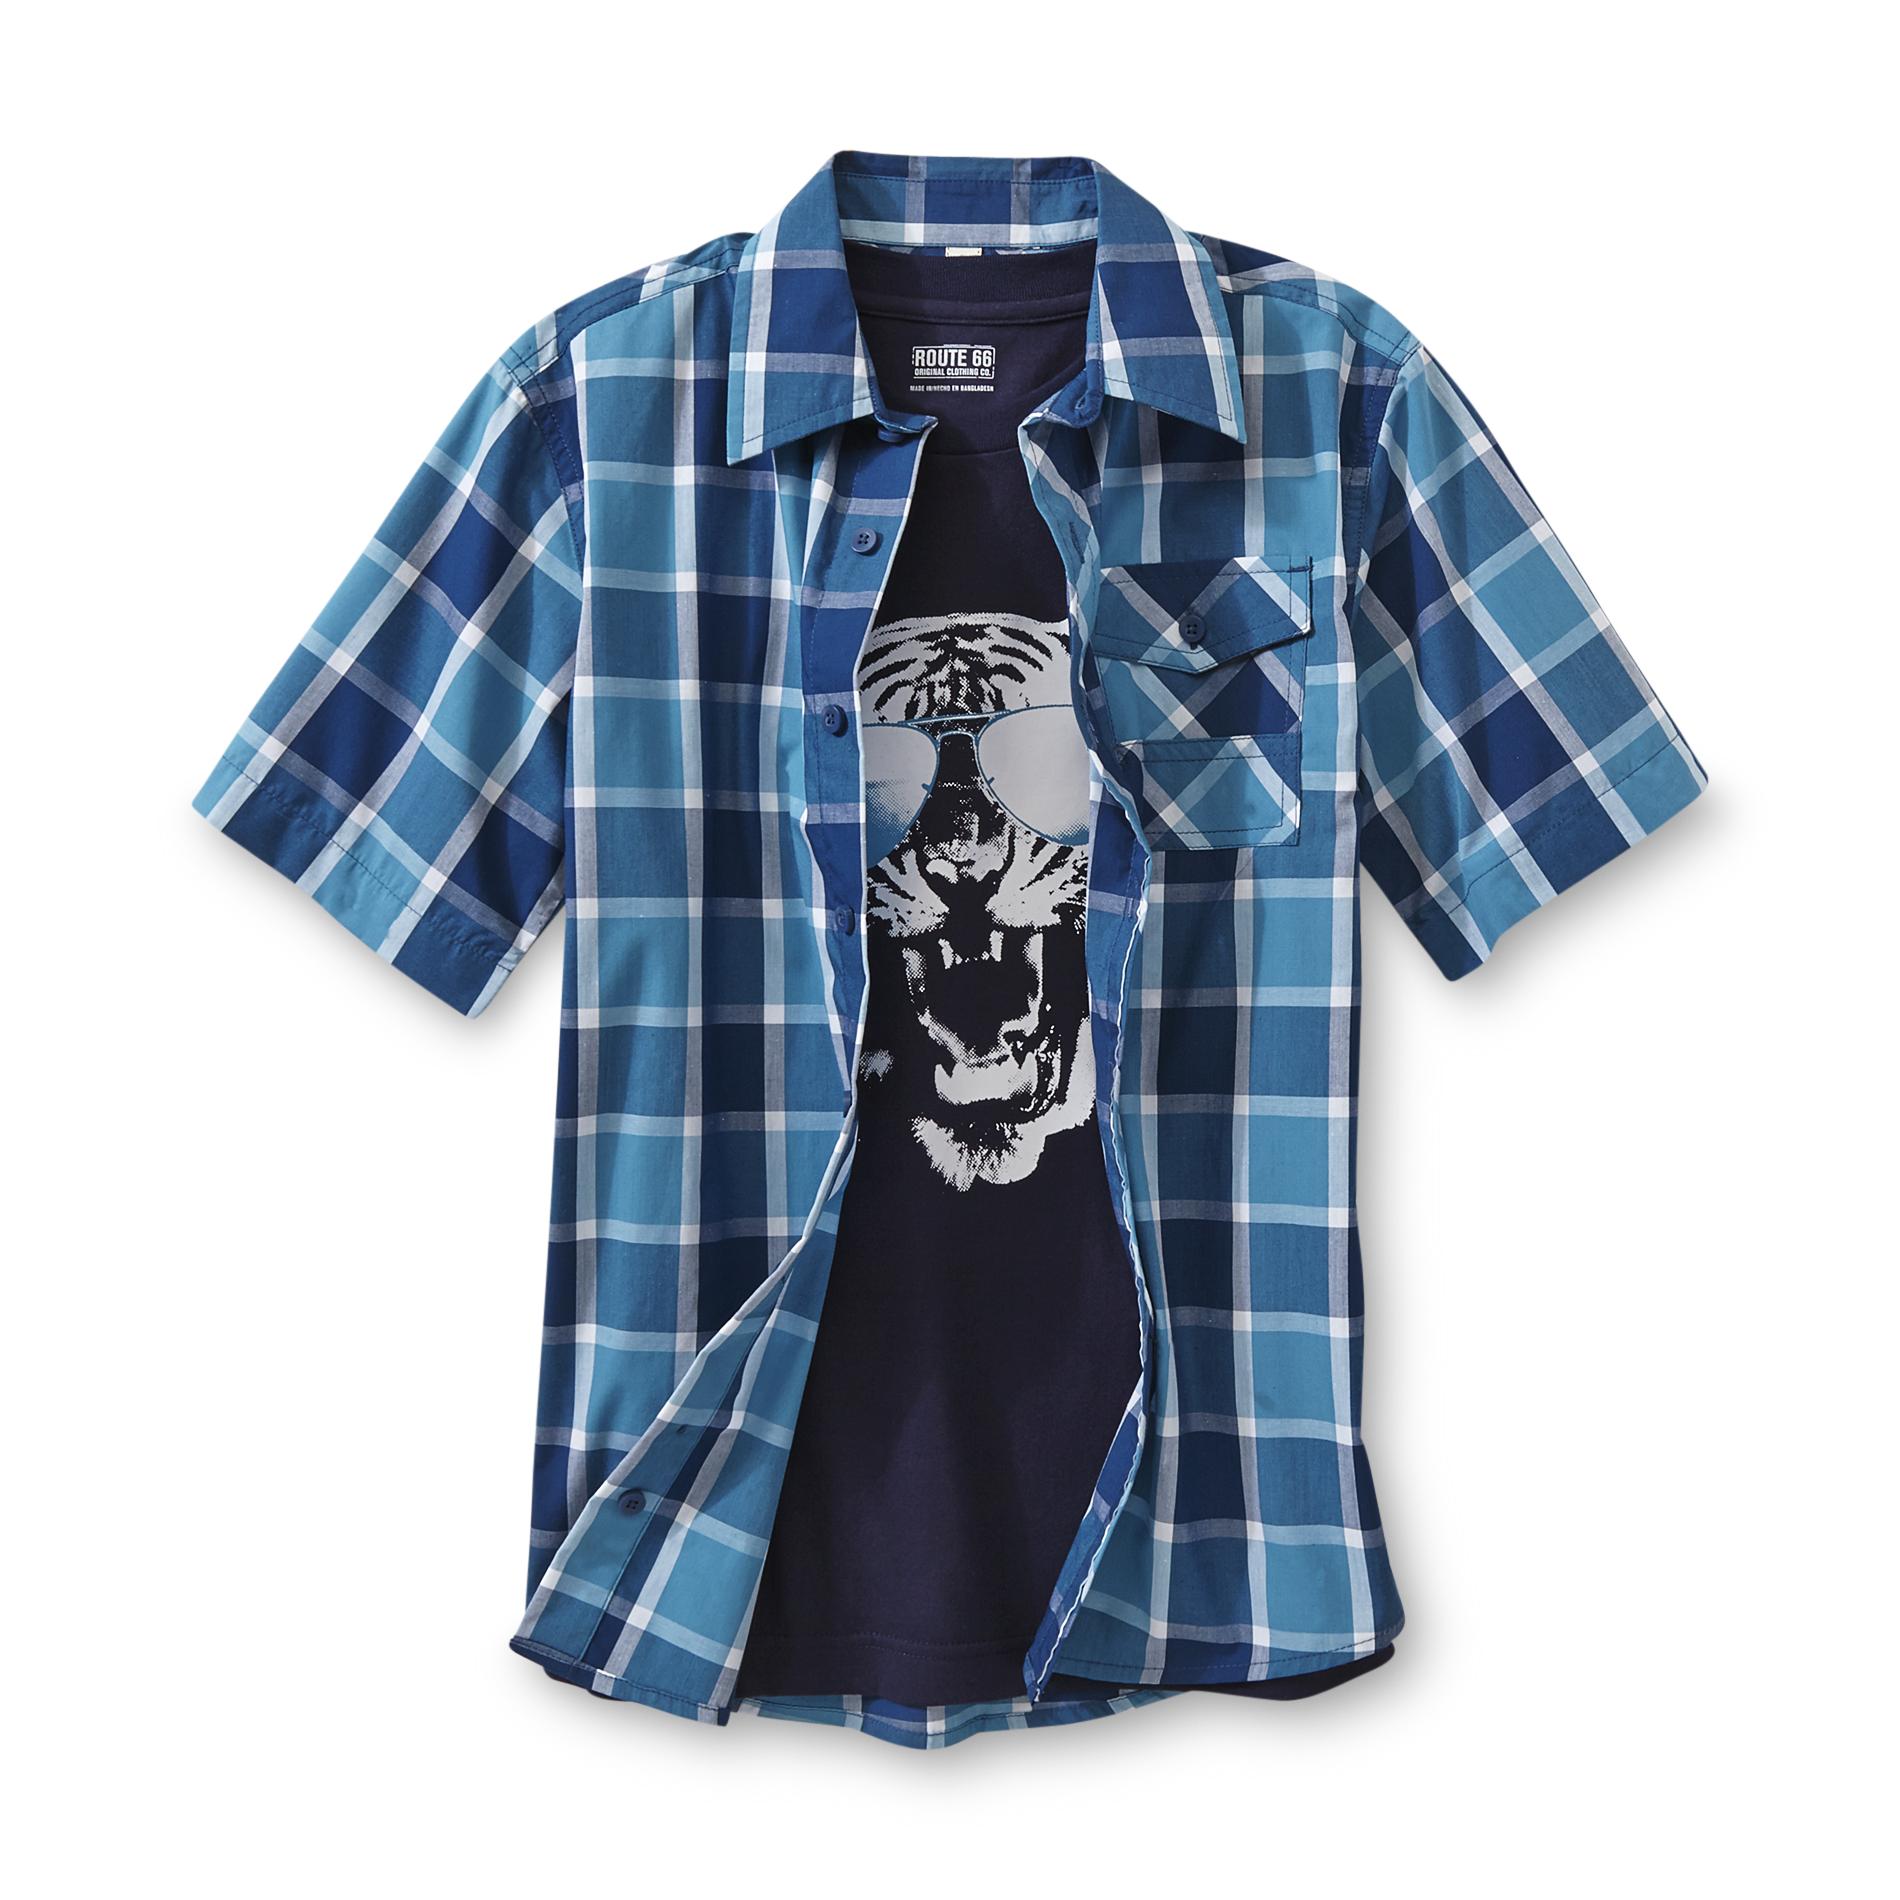 Route 66 Boy's Woven Shirt & Graphic T-Shirt - Tiger Shades